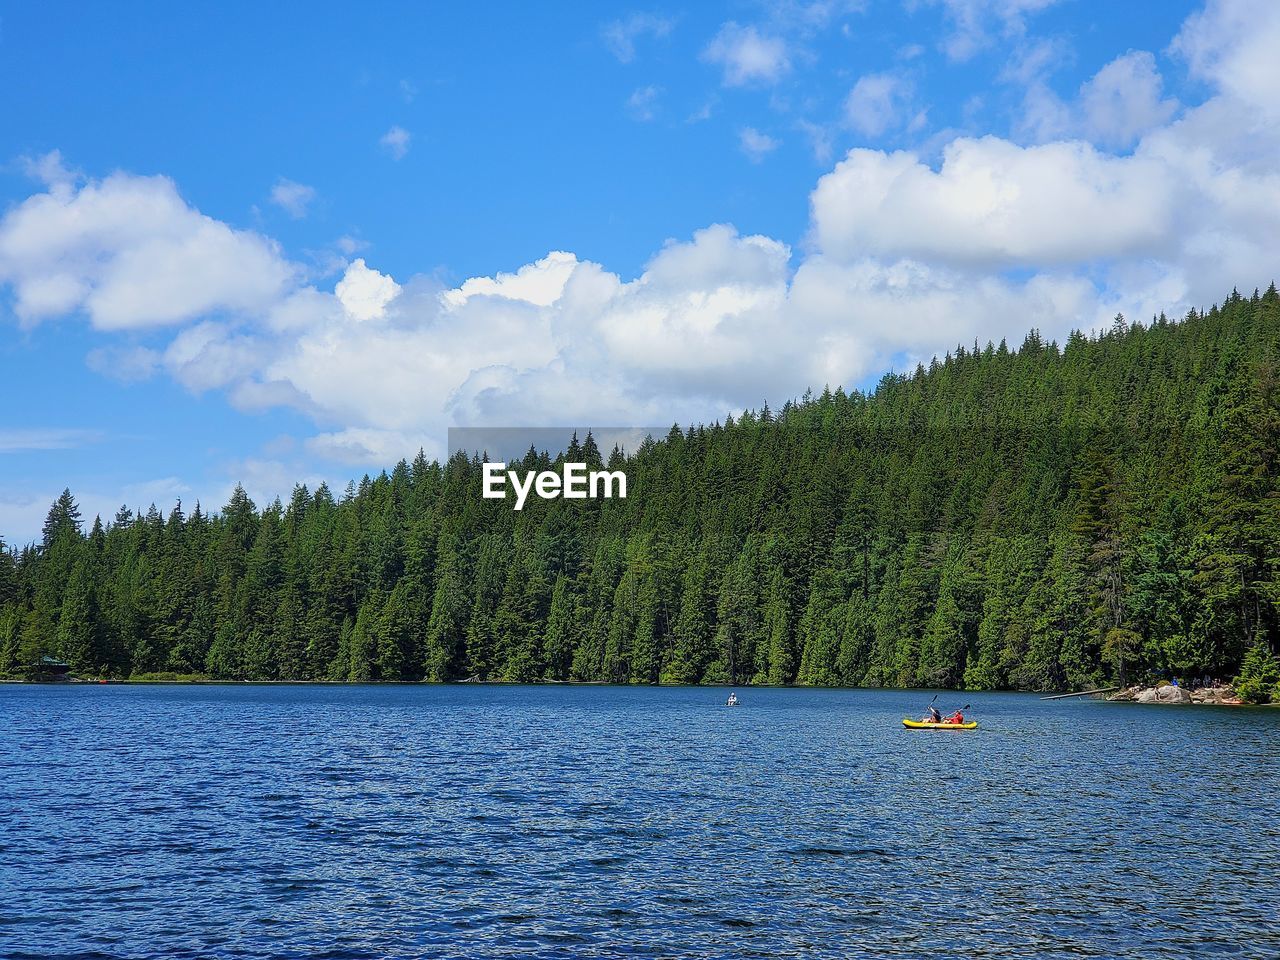 Scenic view of plants by trees against sky with two people canoeing